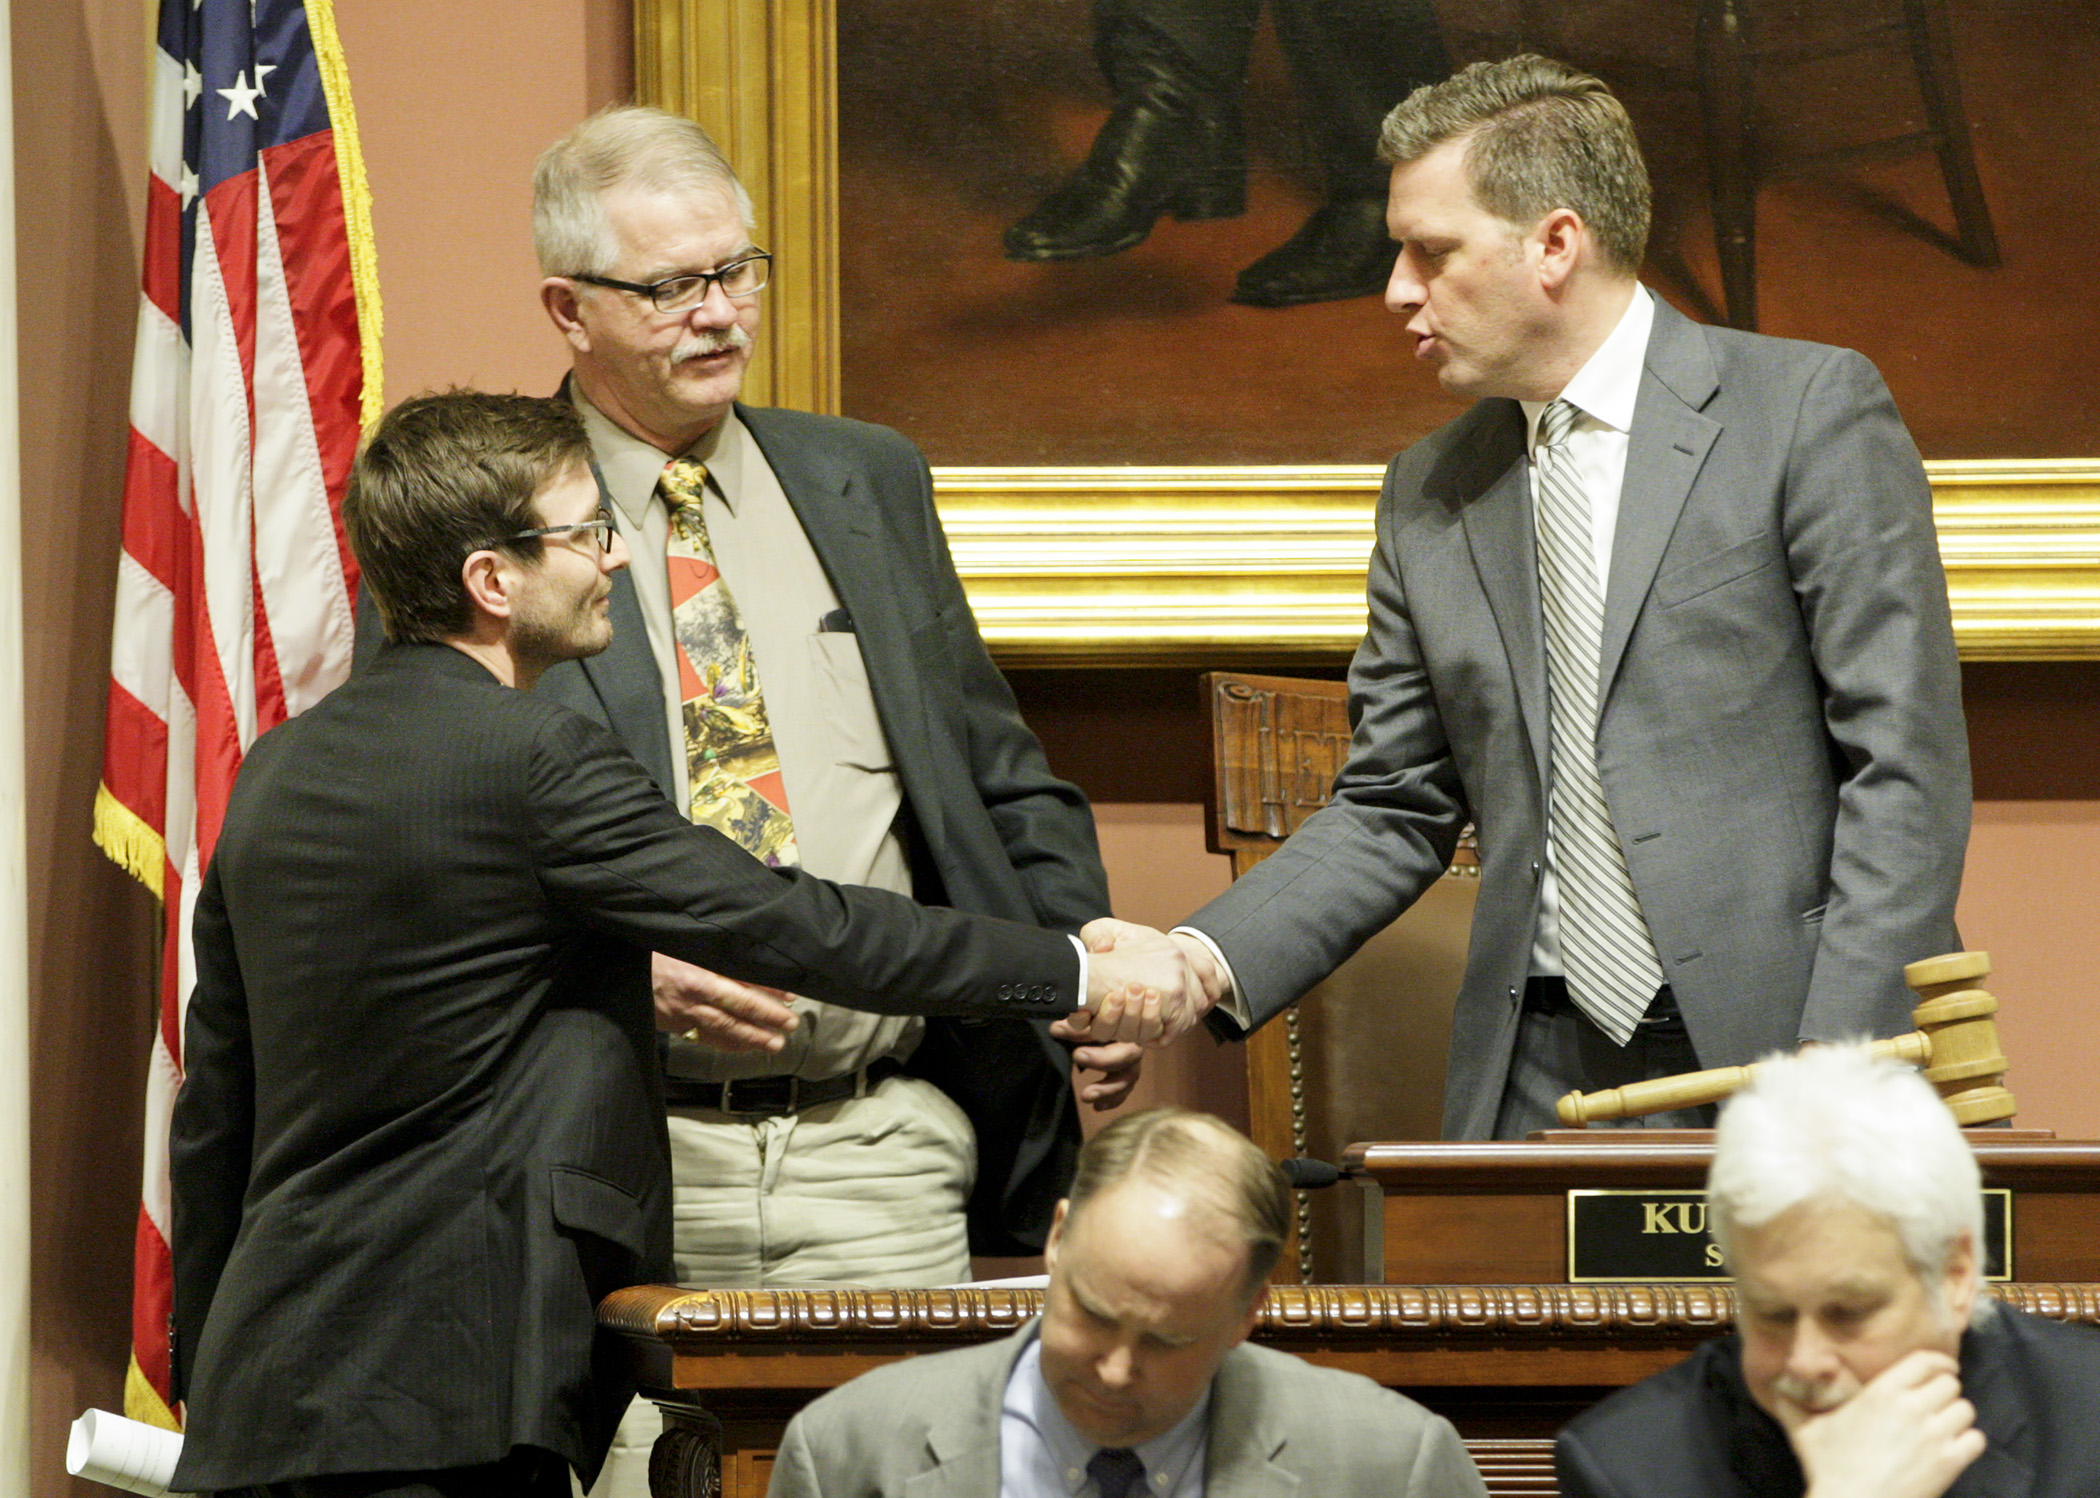 House Speaker Kurt Daudt, right, shakes hands with Rep. Jason Metsa after session had adjourned and the House passed a 26-week unemployment extension bill for workers on the Iron Range. Rep. Rob Ecklund, center, looks on. Photo by Paul Battaglia